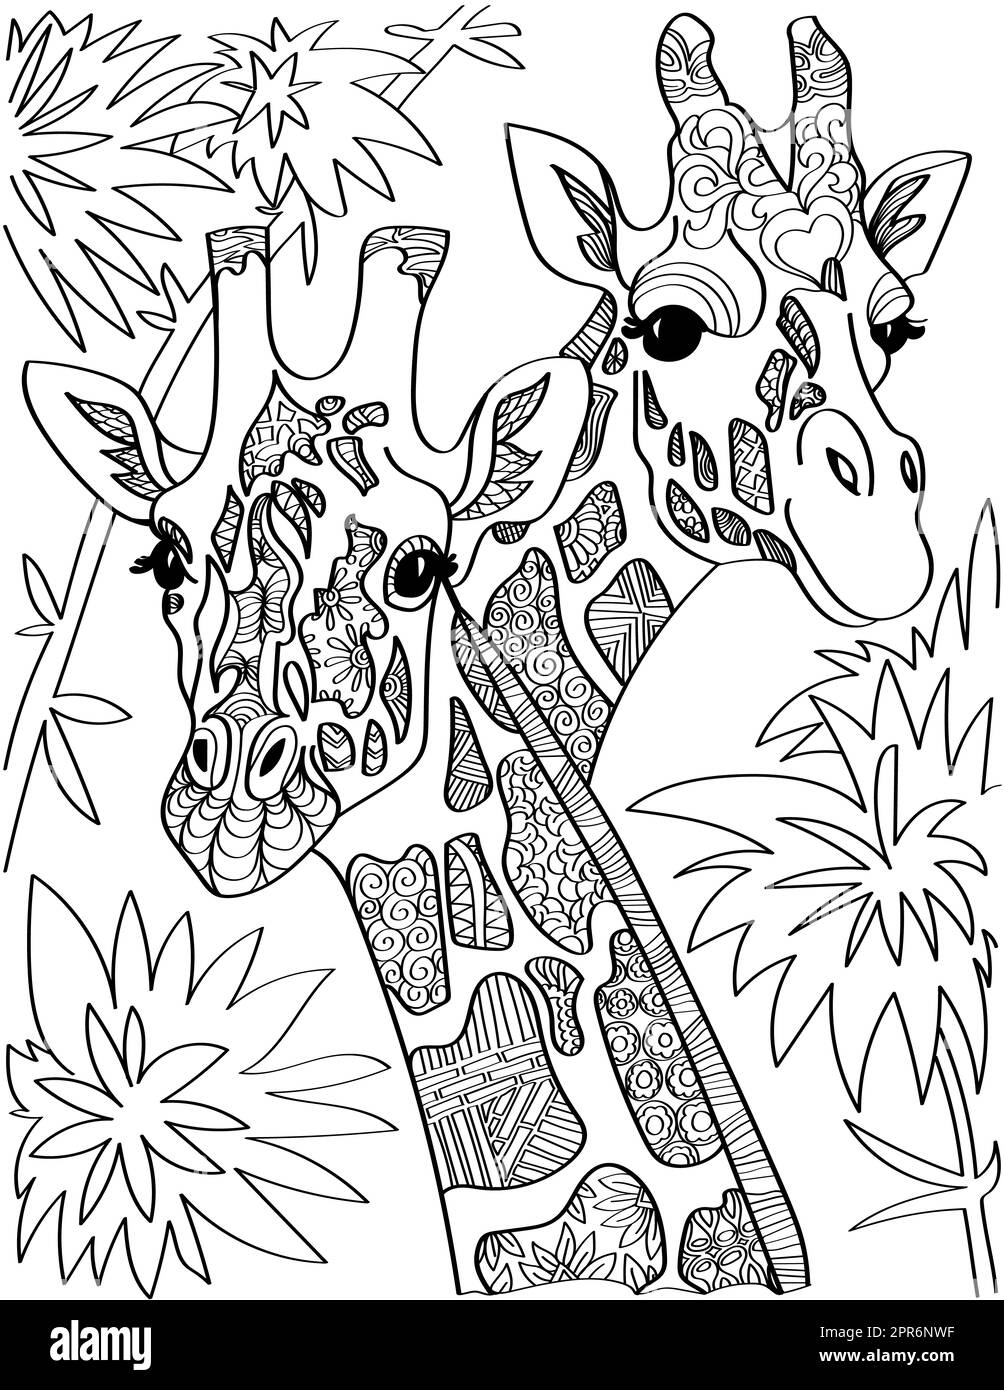 Two Giraffe Head Looking At Both Sides Tall Trees Colorless Line Drawing. Stock Photo